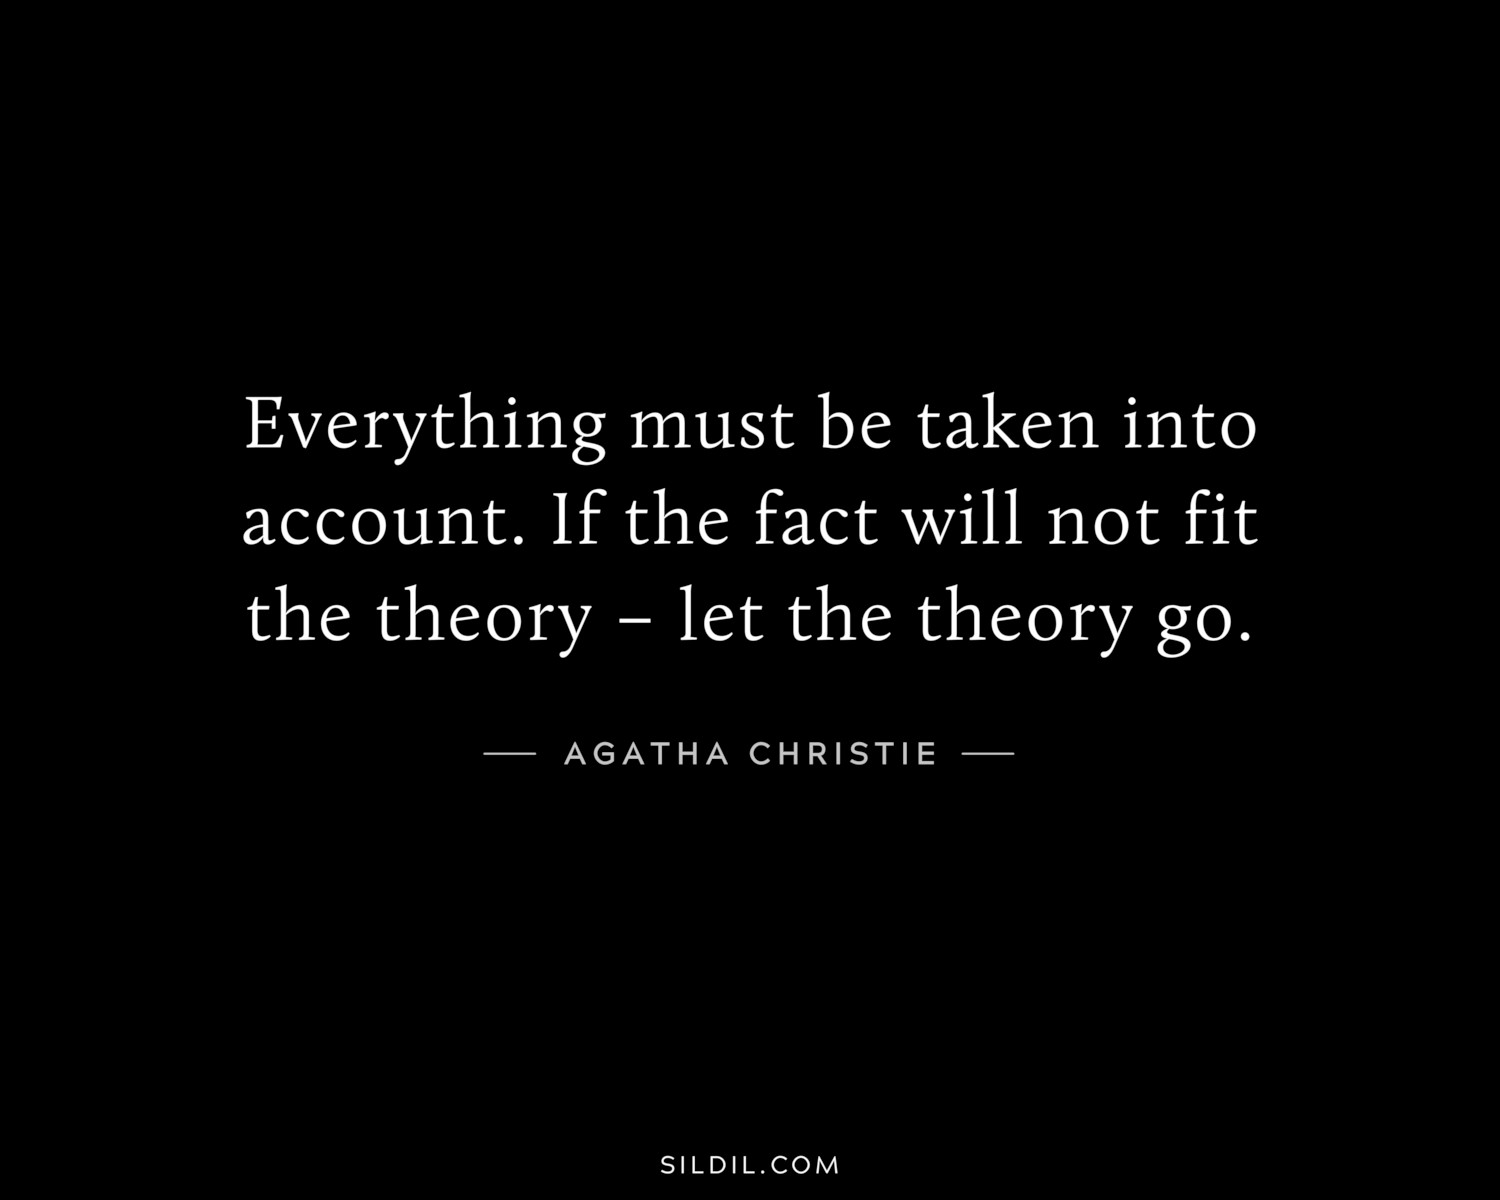 Everything must be taken into account. If the fact will not fit the theory – let the theory go.